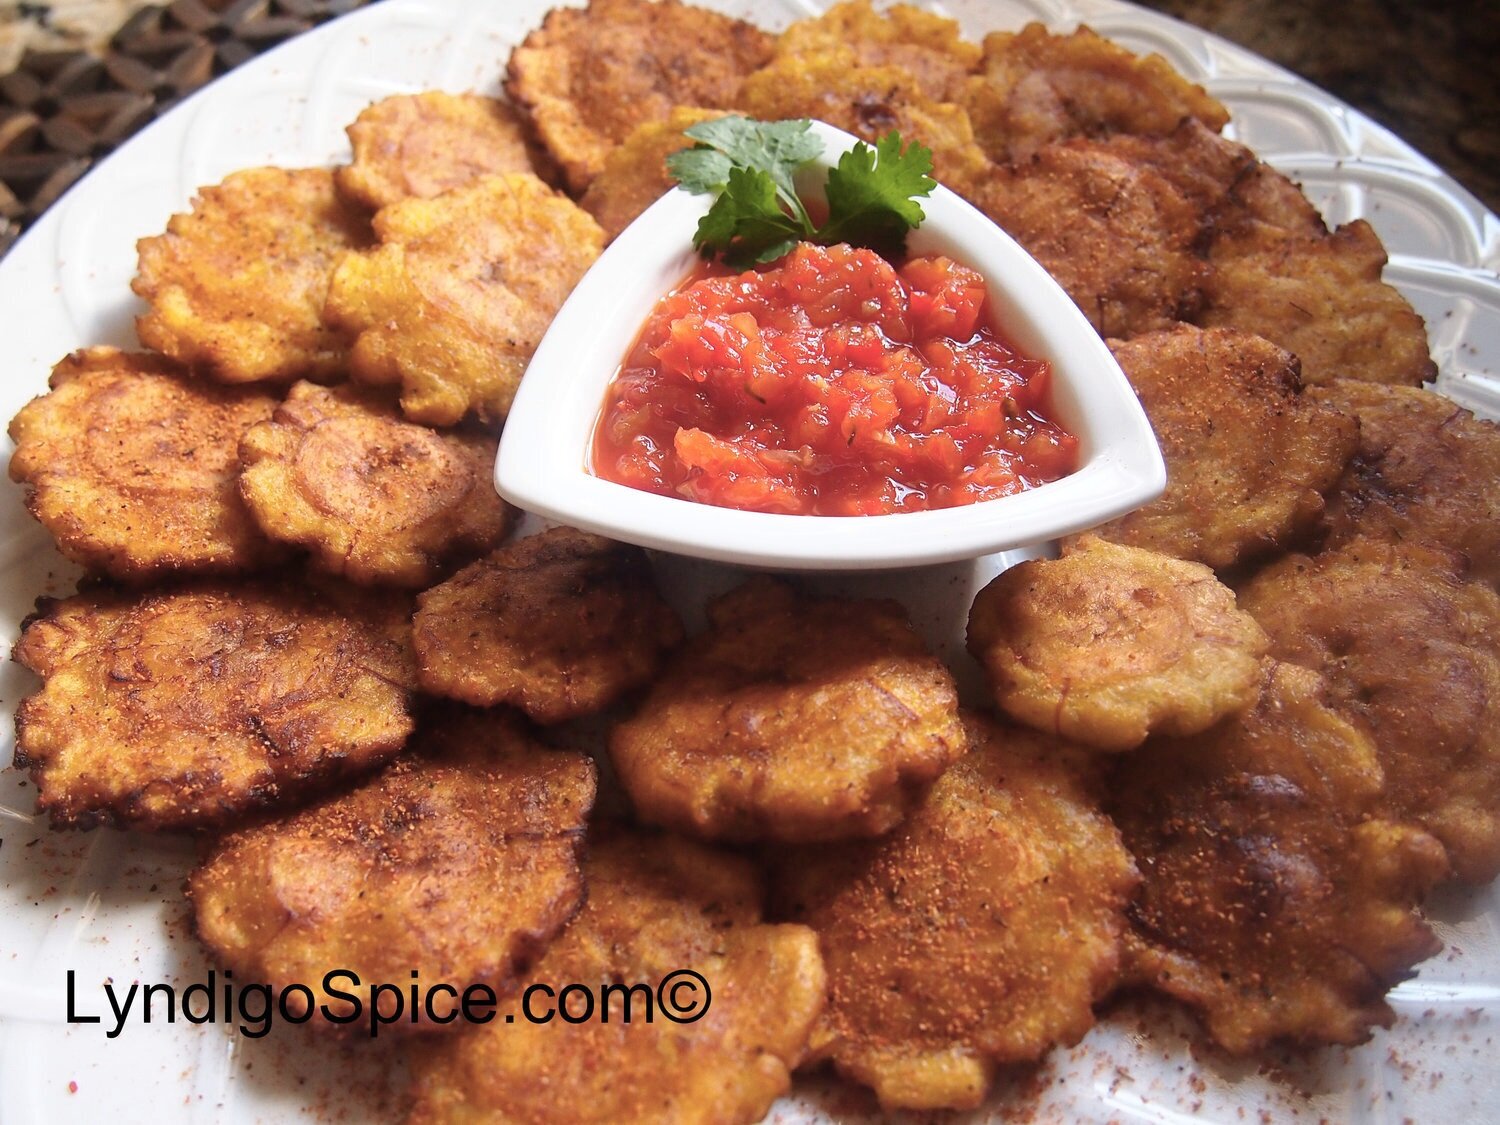 Tostones seasoned with Original Spice Rub and Spicy Red Pepper Relish for dipping.